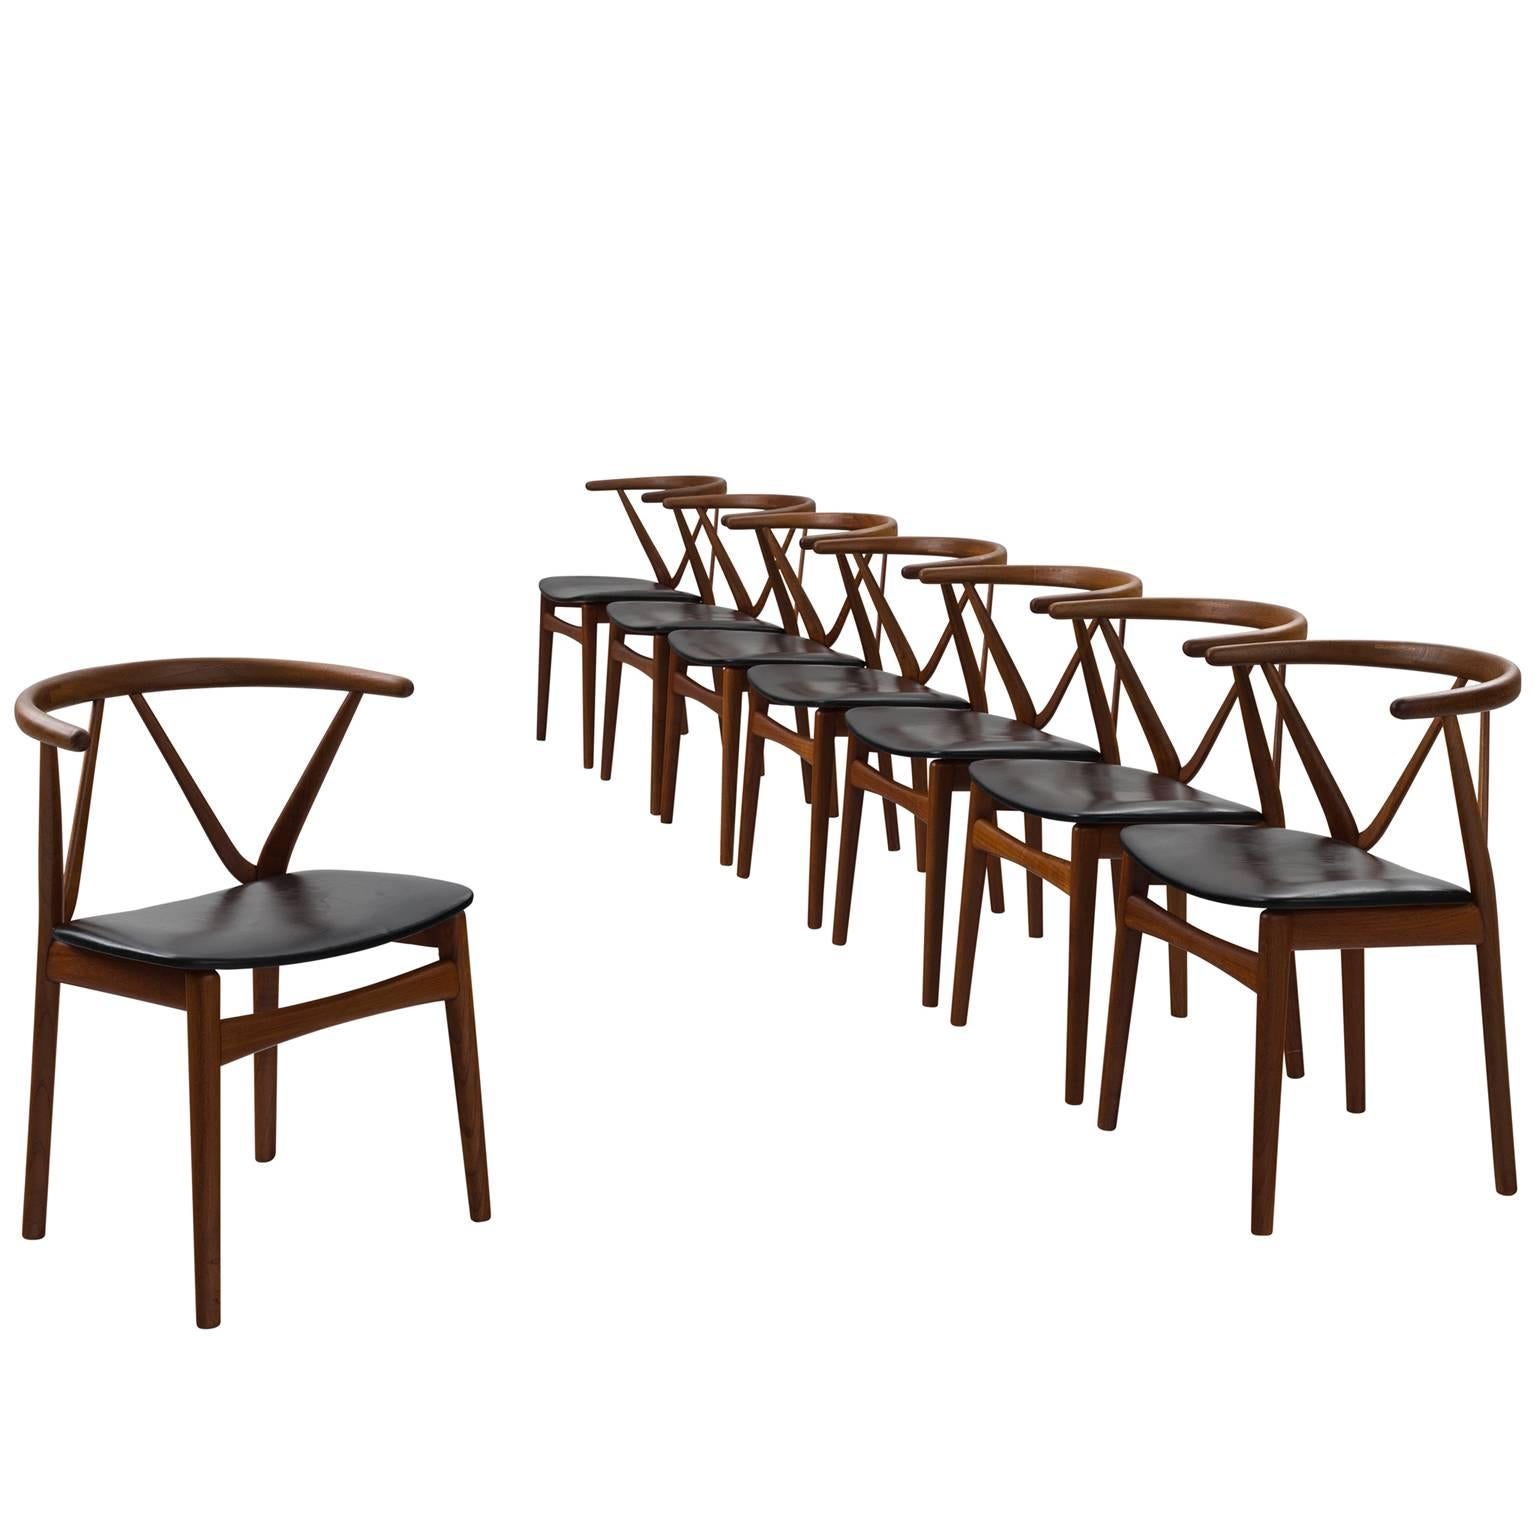 Henning Kjaernulf Set of Eight Dining Chairs in Teak and Black Upholstery